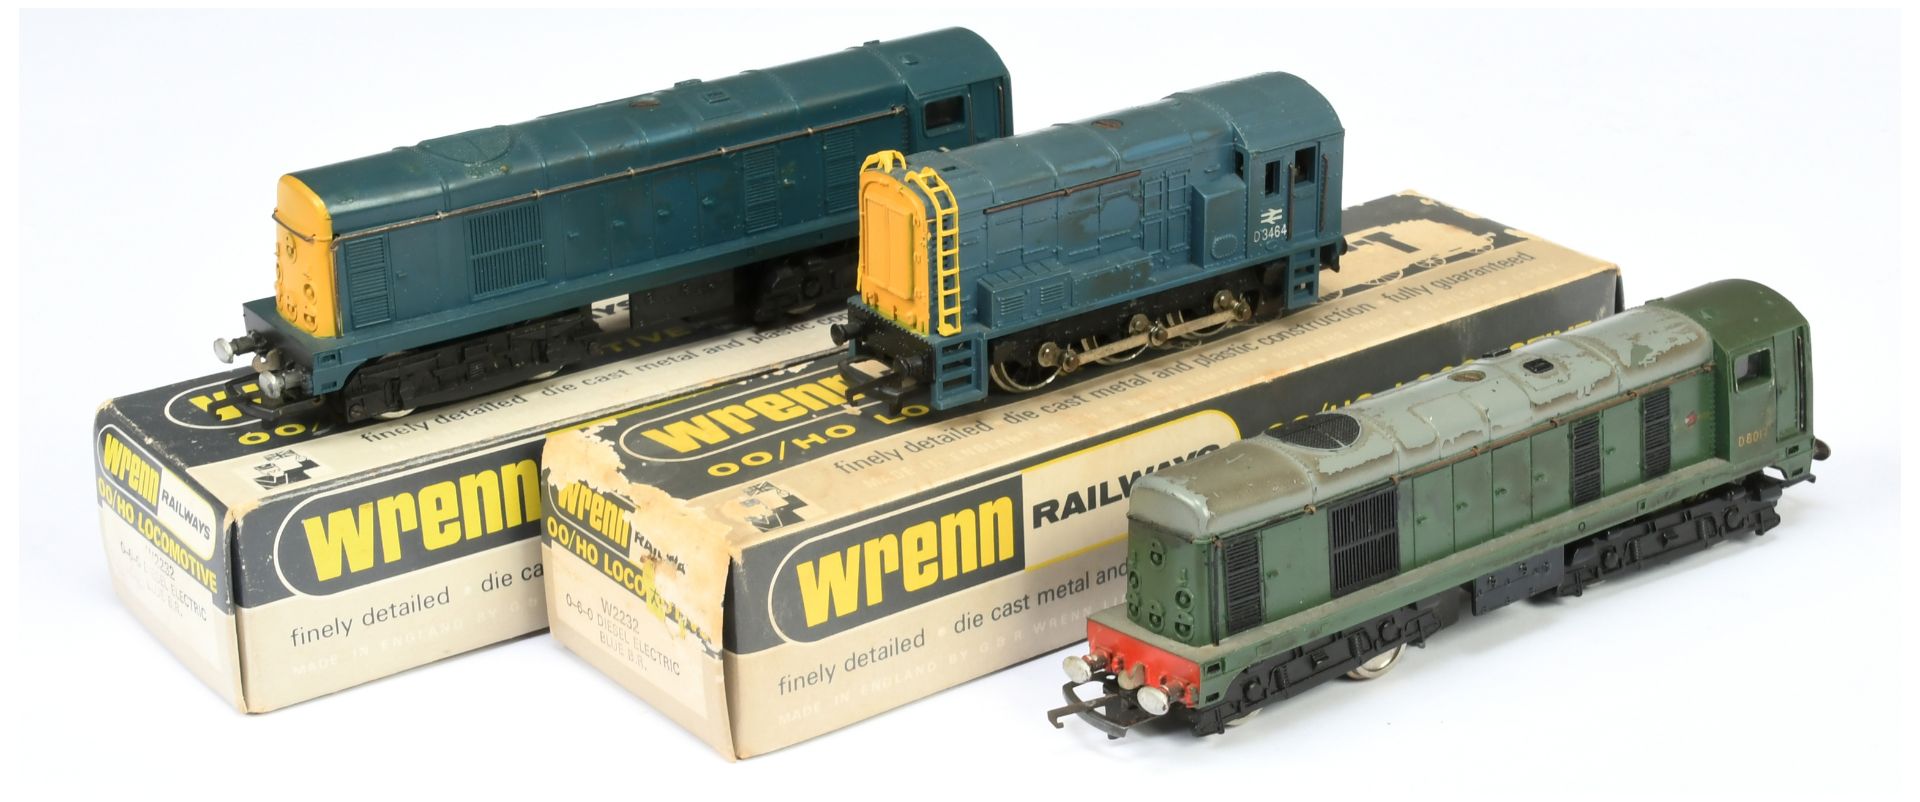 Wrenn a boxed and unboxed of Diesel Locomotives to include